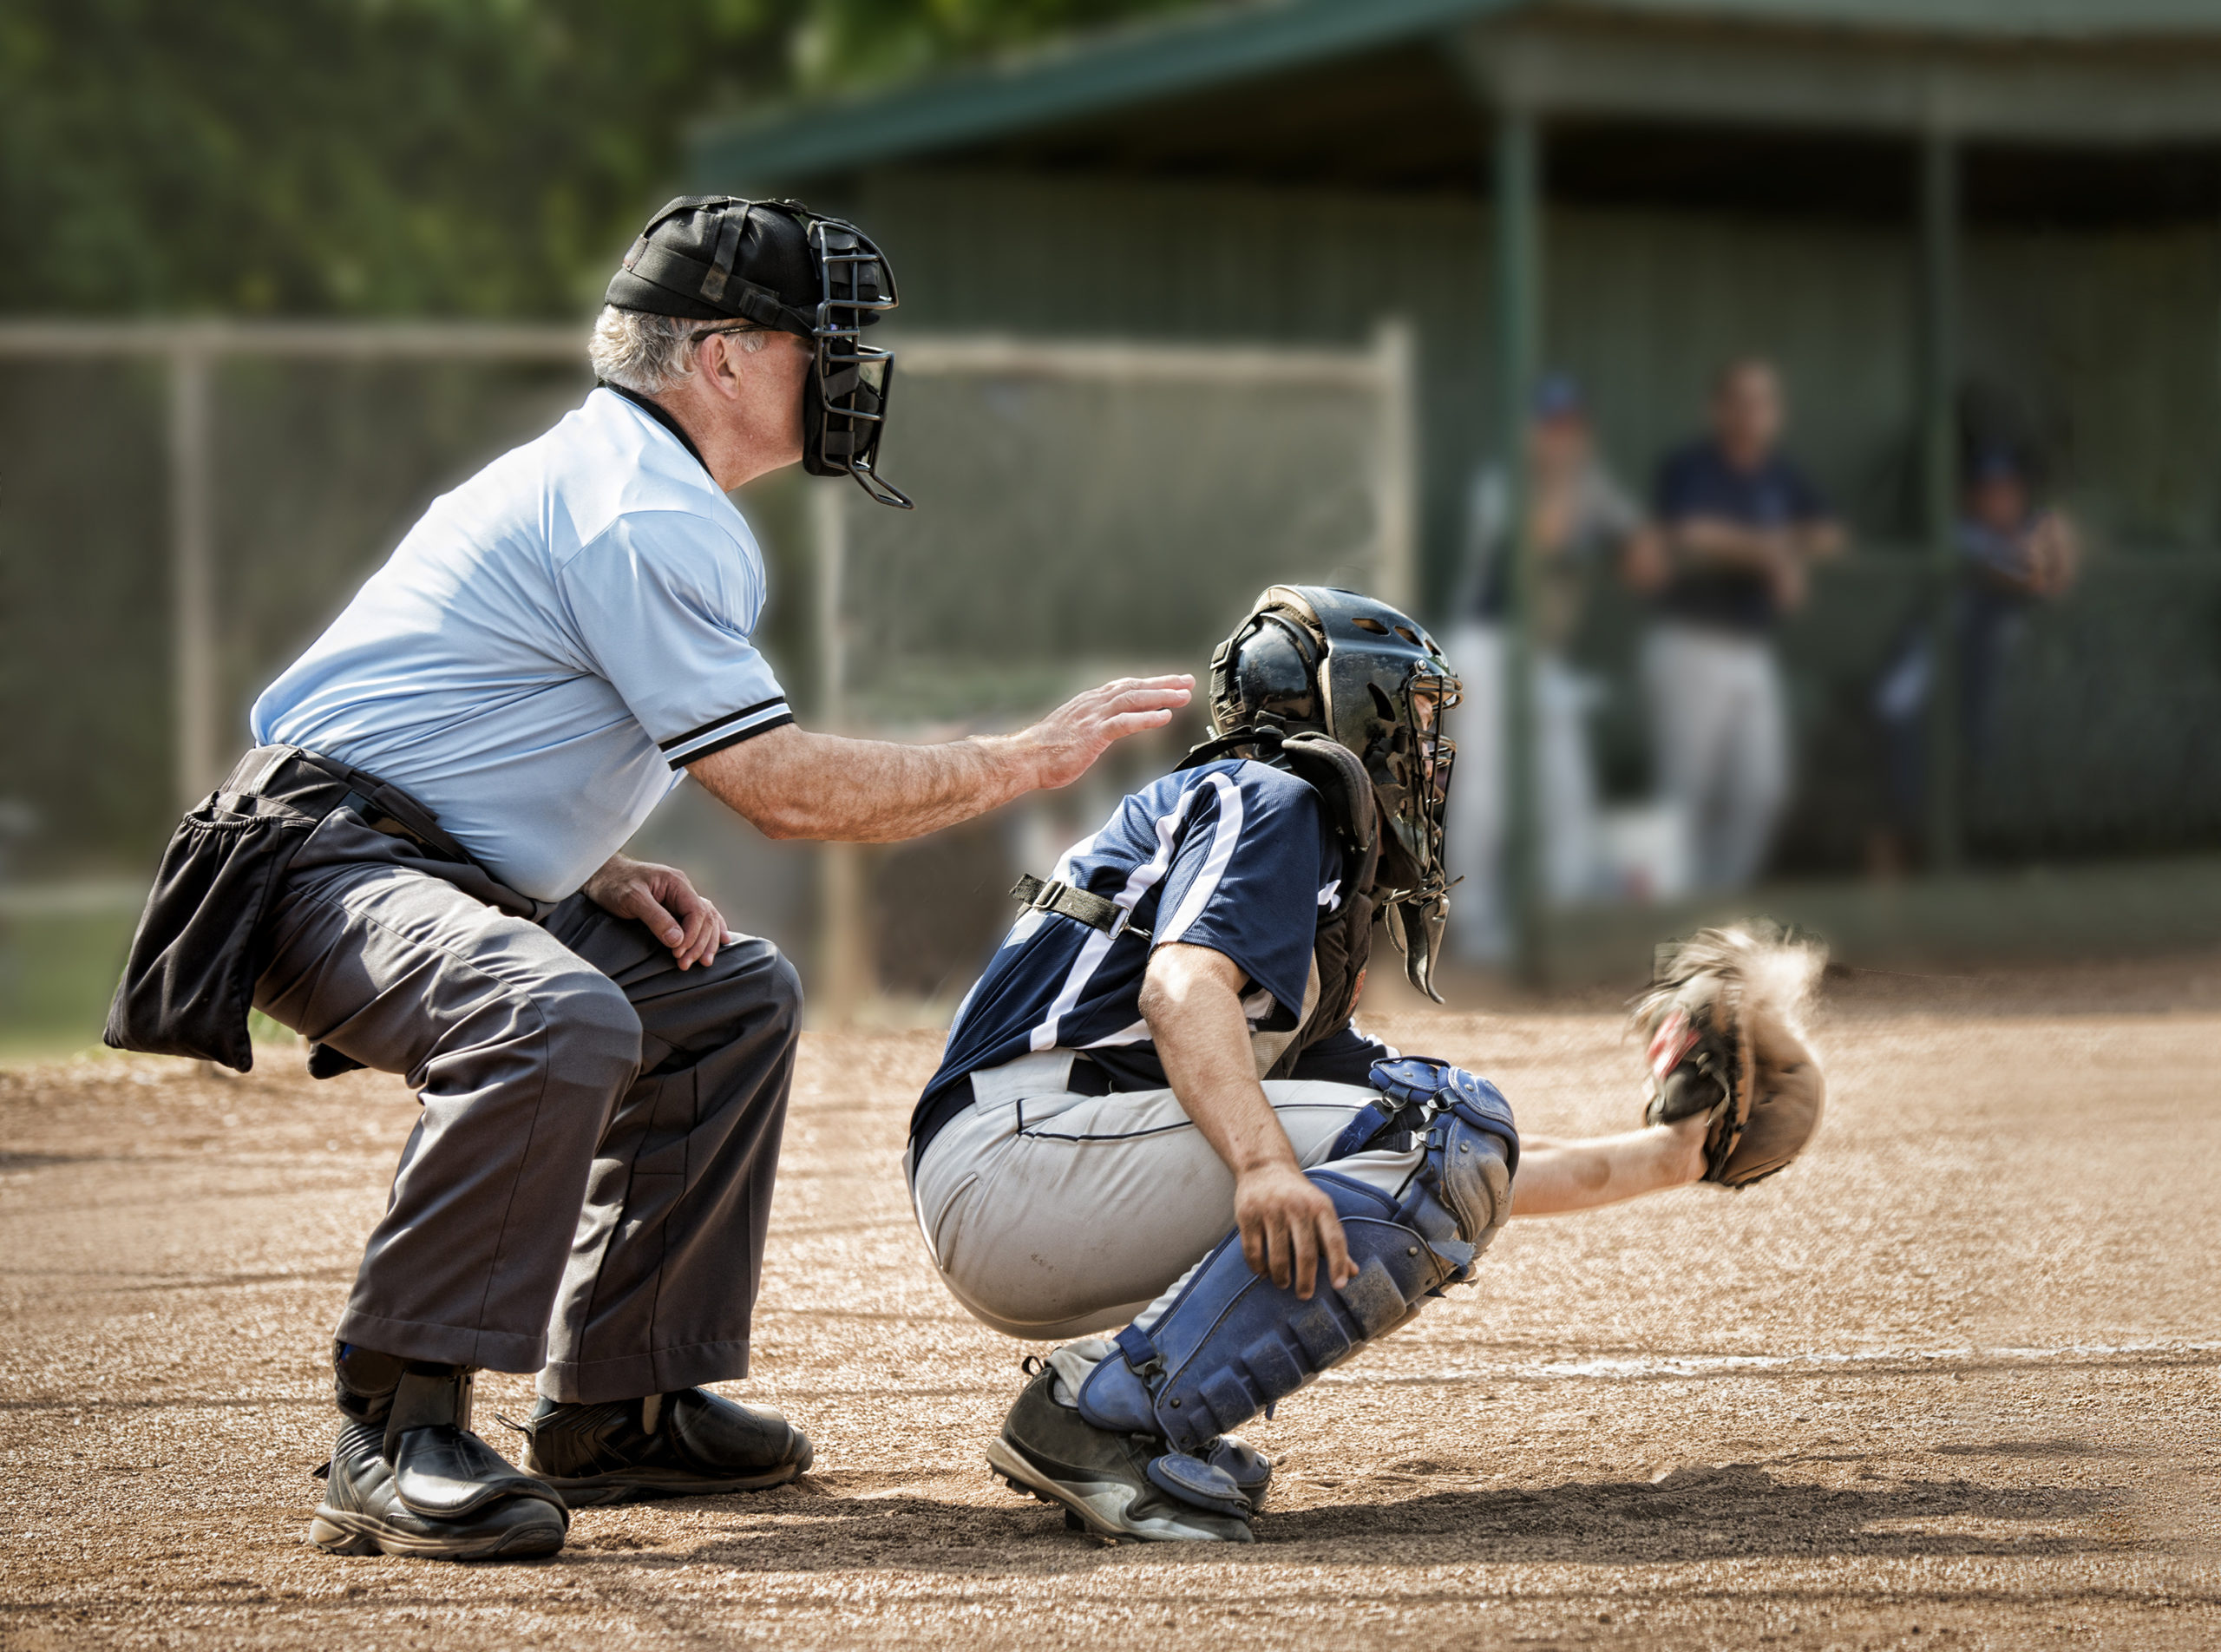 Umpire and catcher, just as ball hits catcher's mitt, dugout and players in background